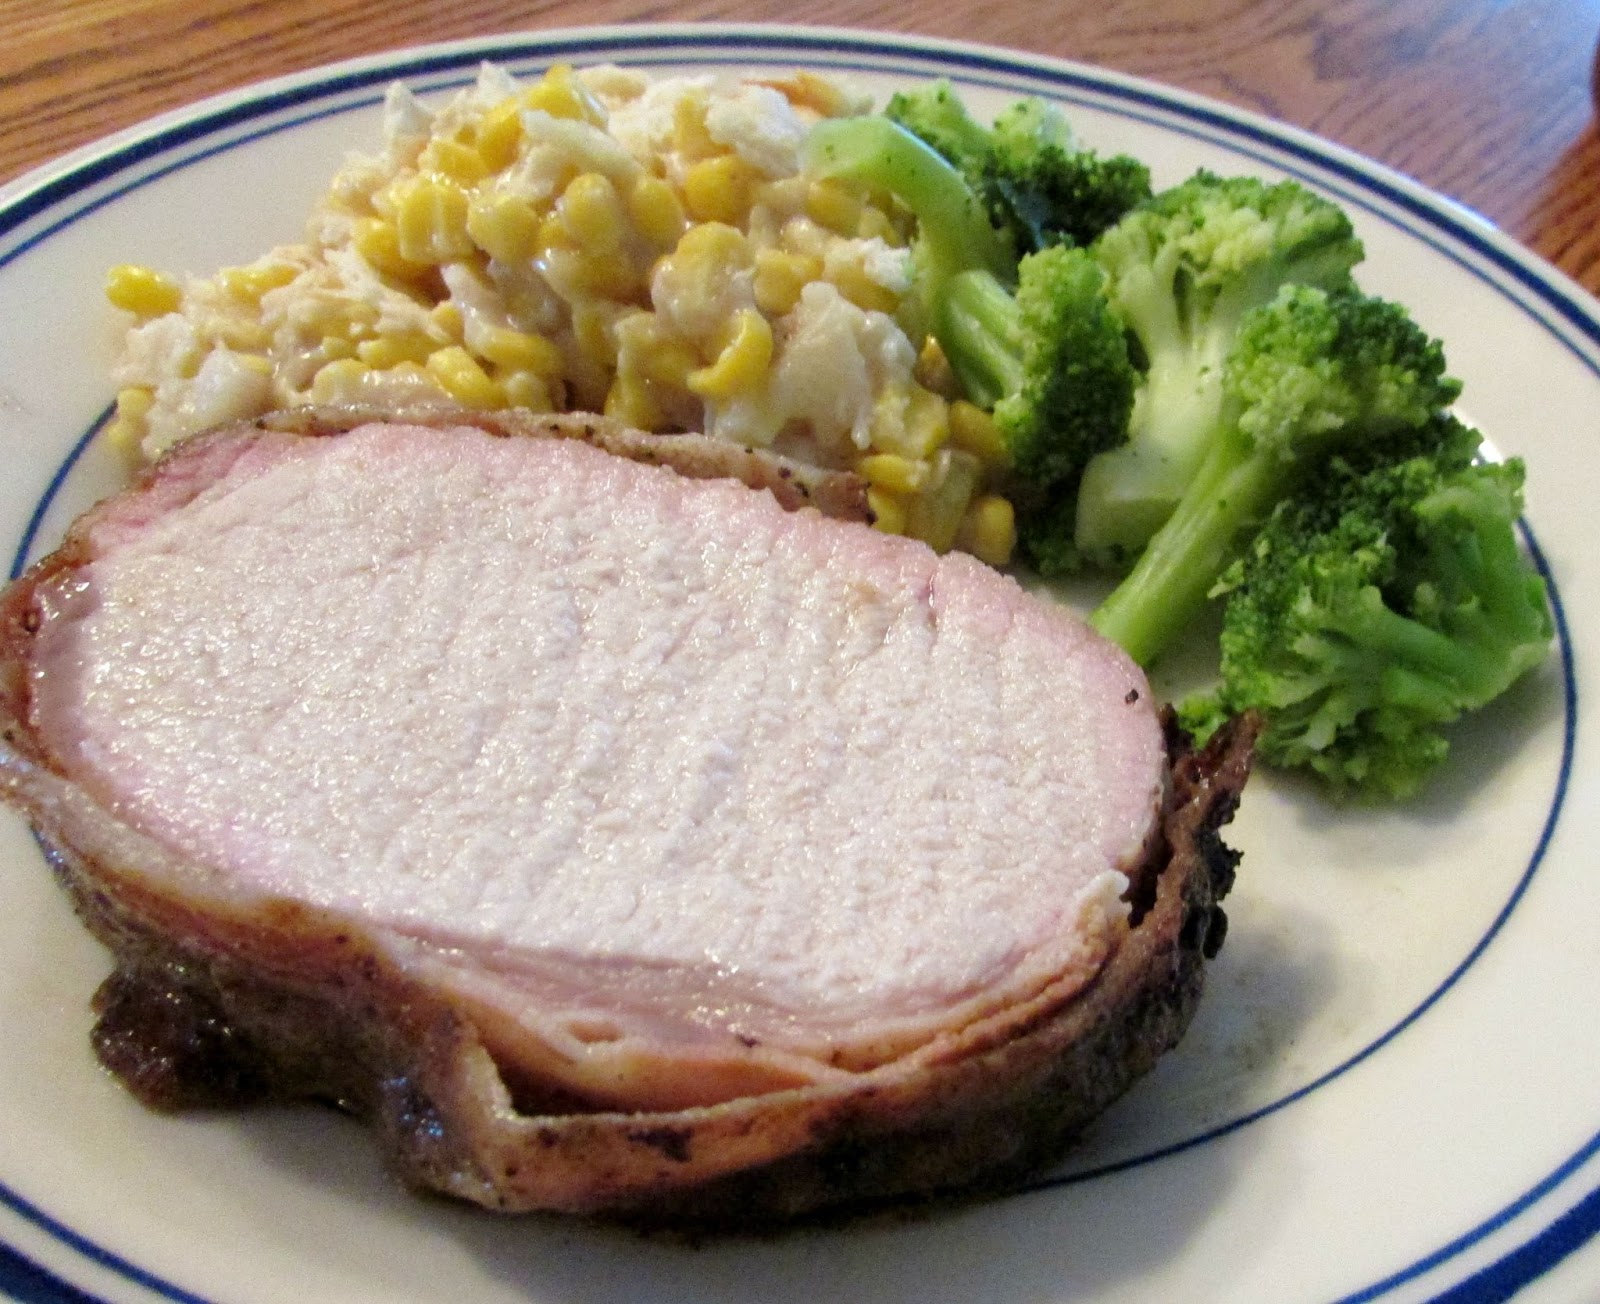 dinner plate with bacon wrapped pork loin, broccoli and scalloped corn